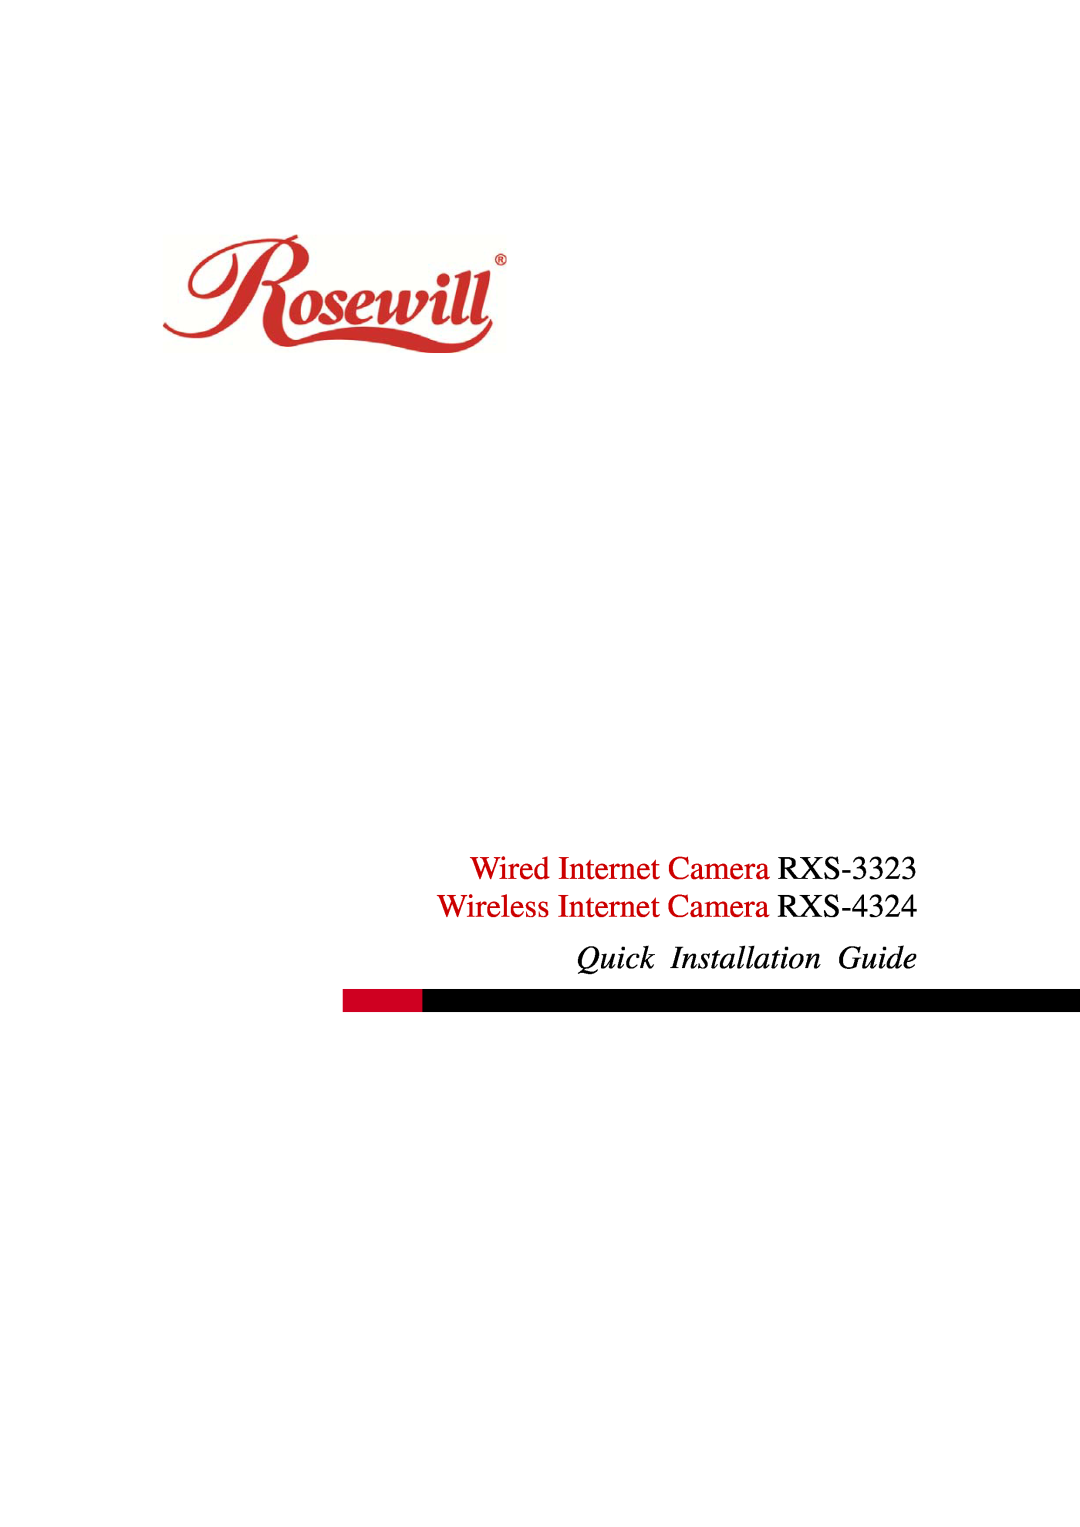 Rosewill RXS-3323 manual Quick Installation Guide 